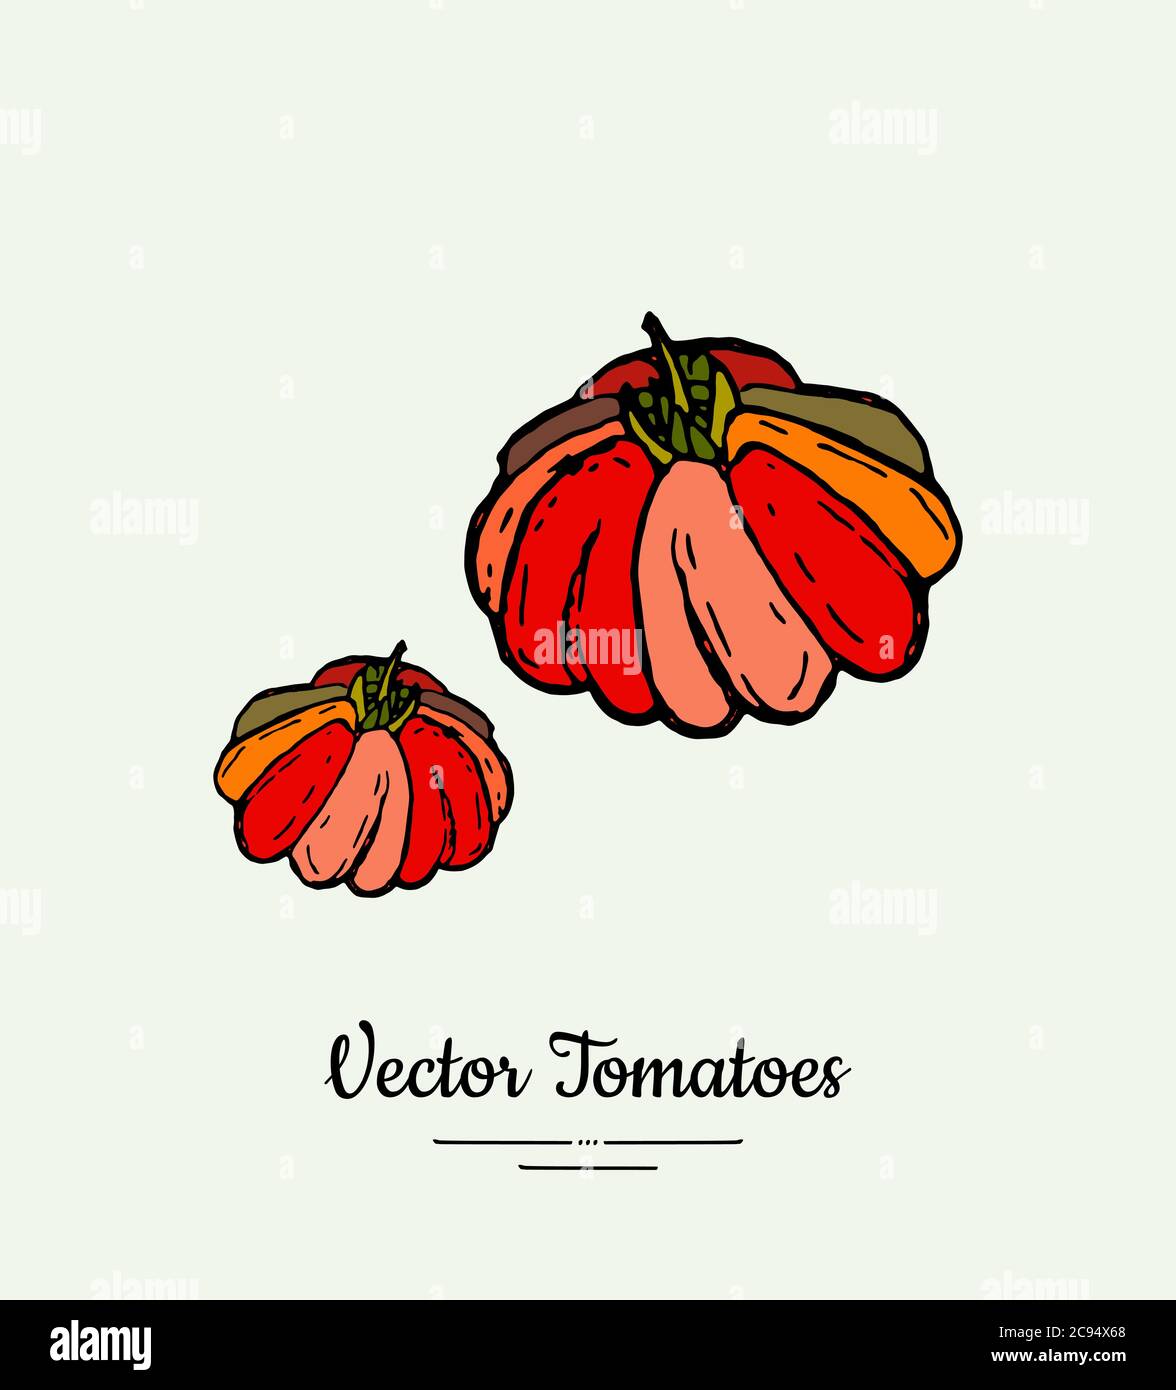 Tomato vegetable vector isolate. Red whole tomatoes. Vegetables hand drawn illustration. Trendy food vegetarian Stock Vector